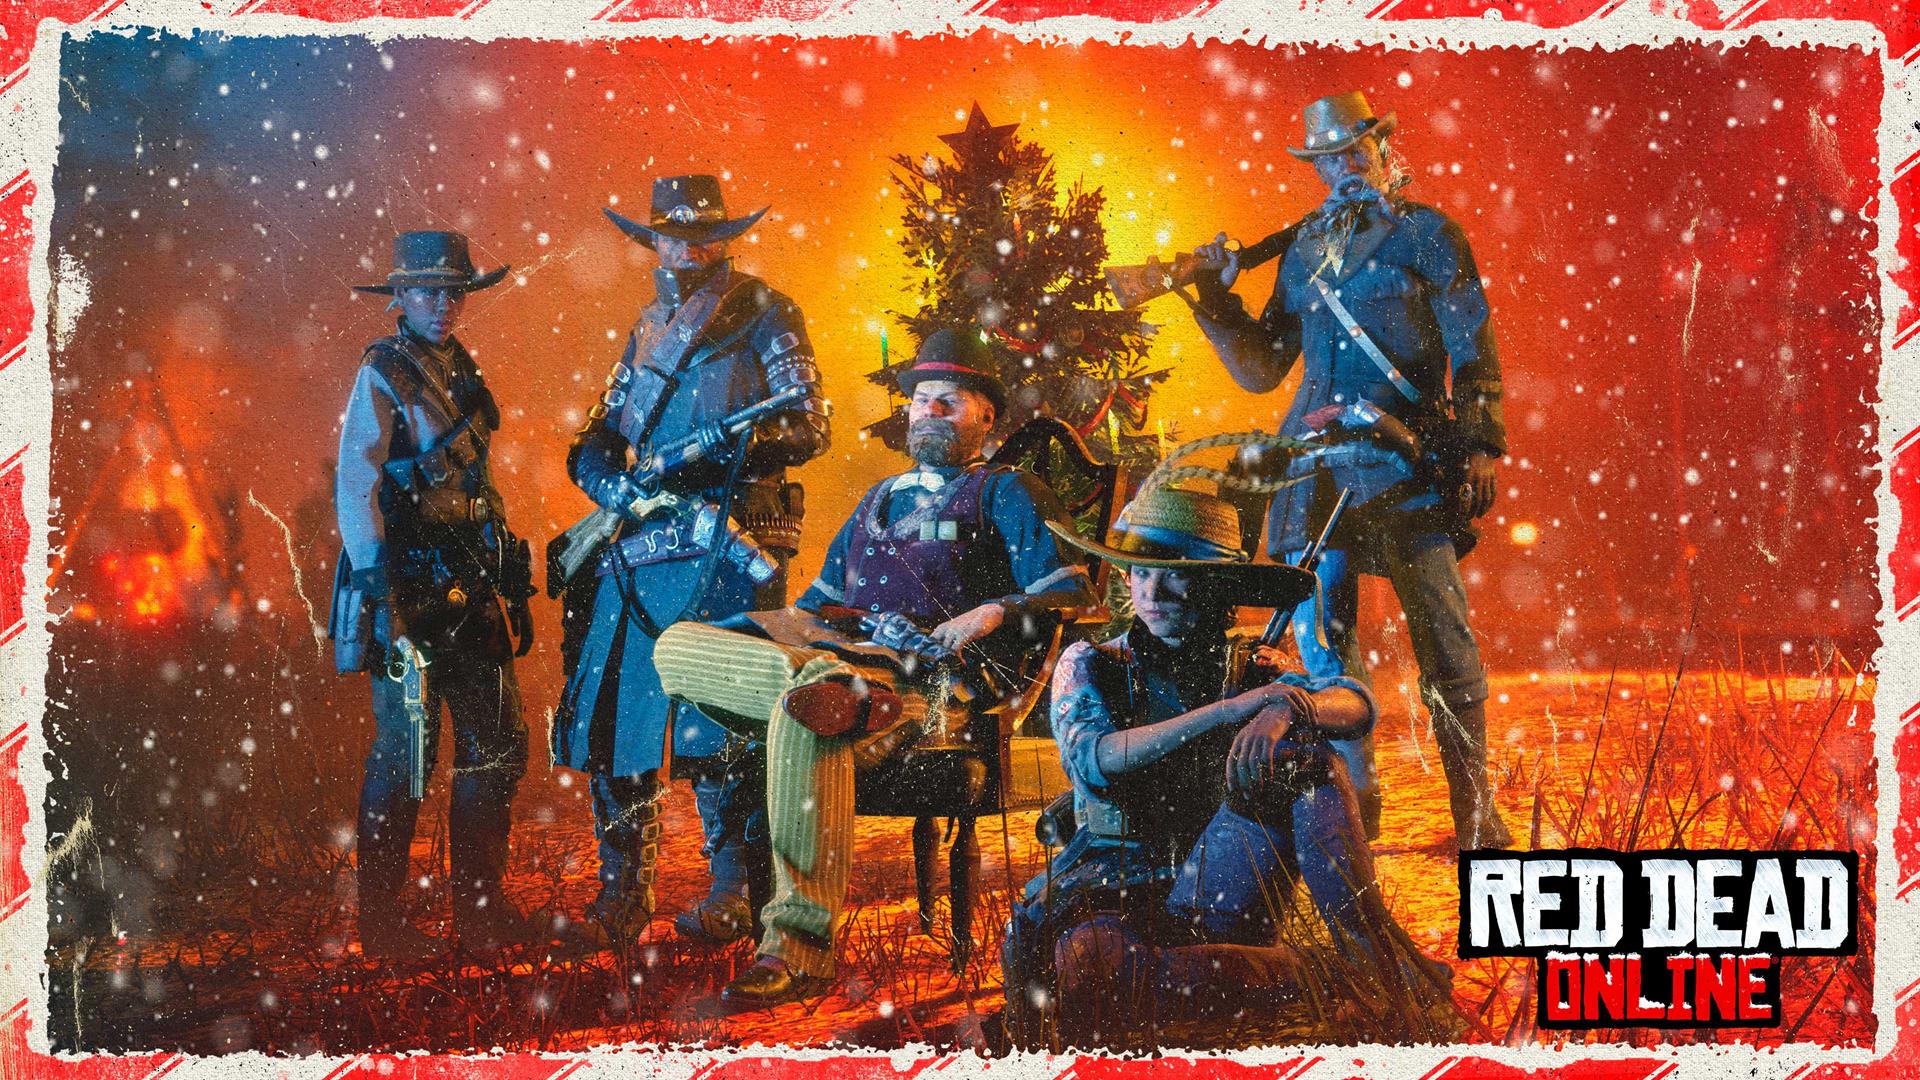 Holidays in GTA Online and Red Dead Online, GamersRD